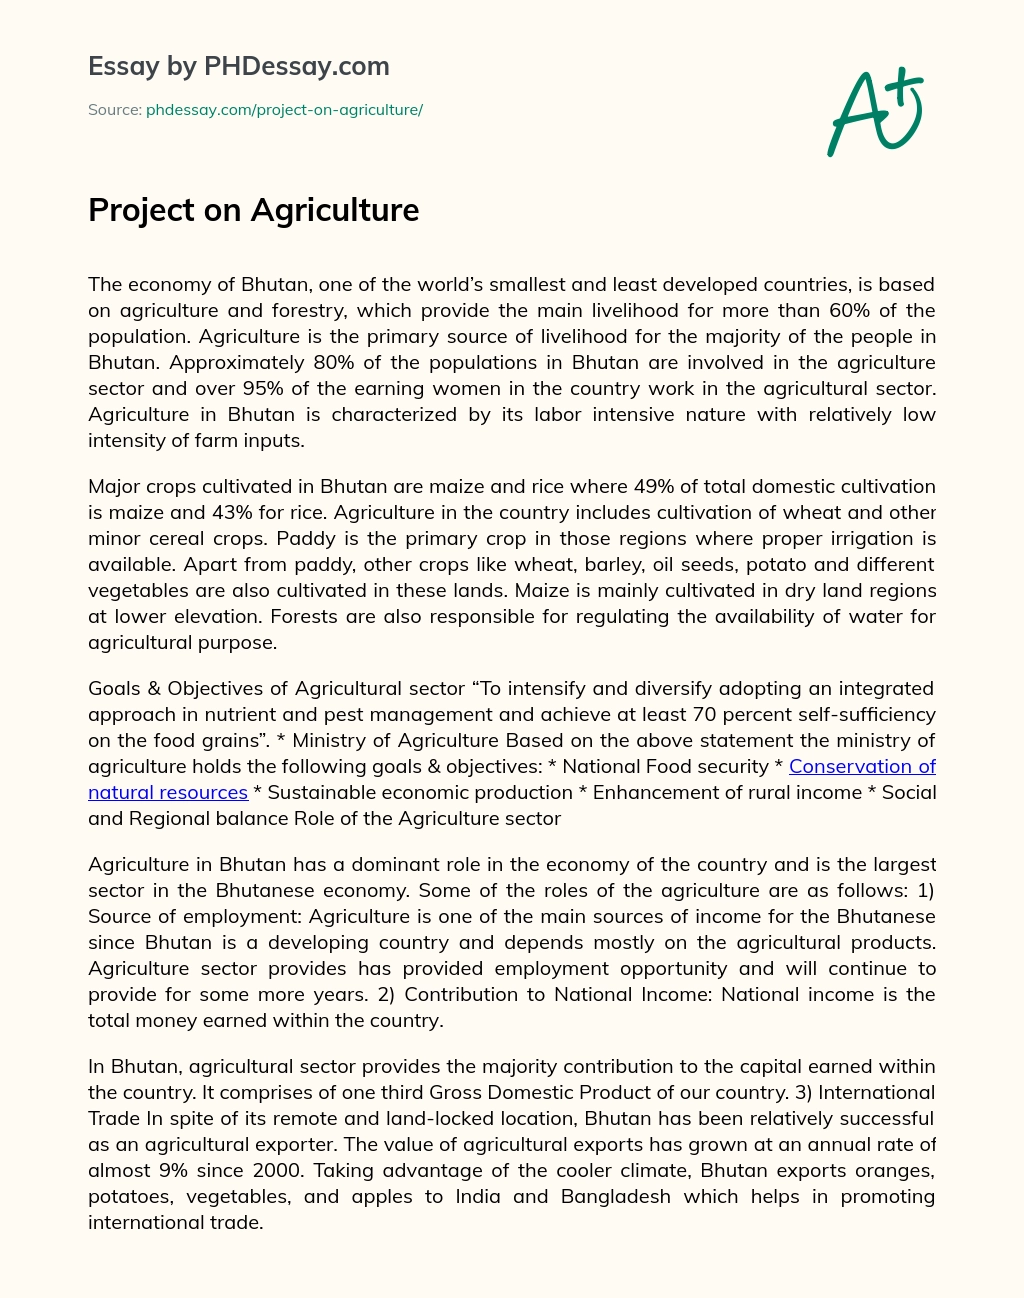 Project on Agriculture essay